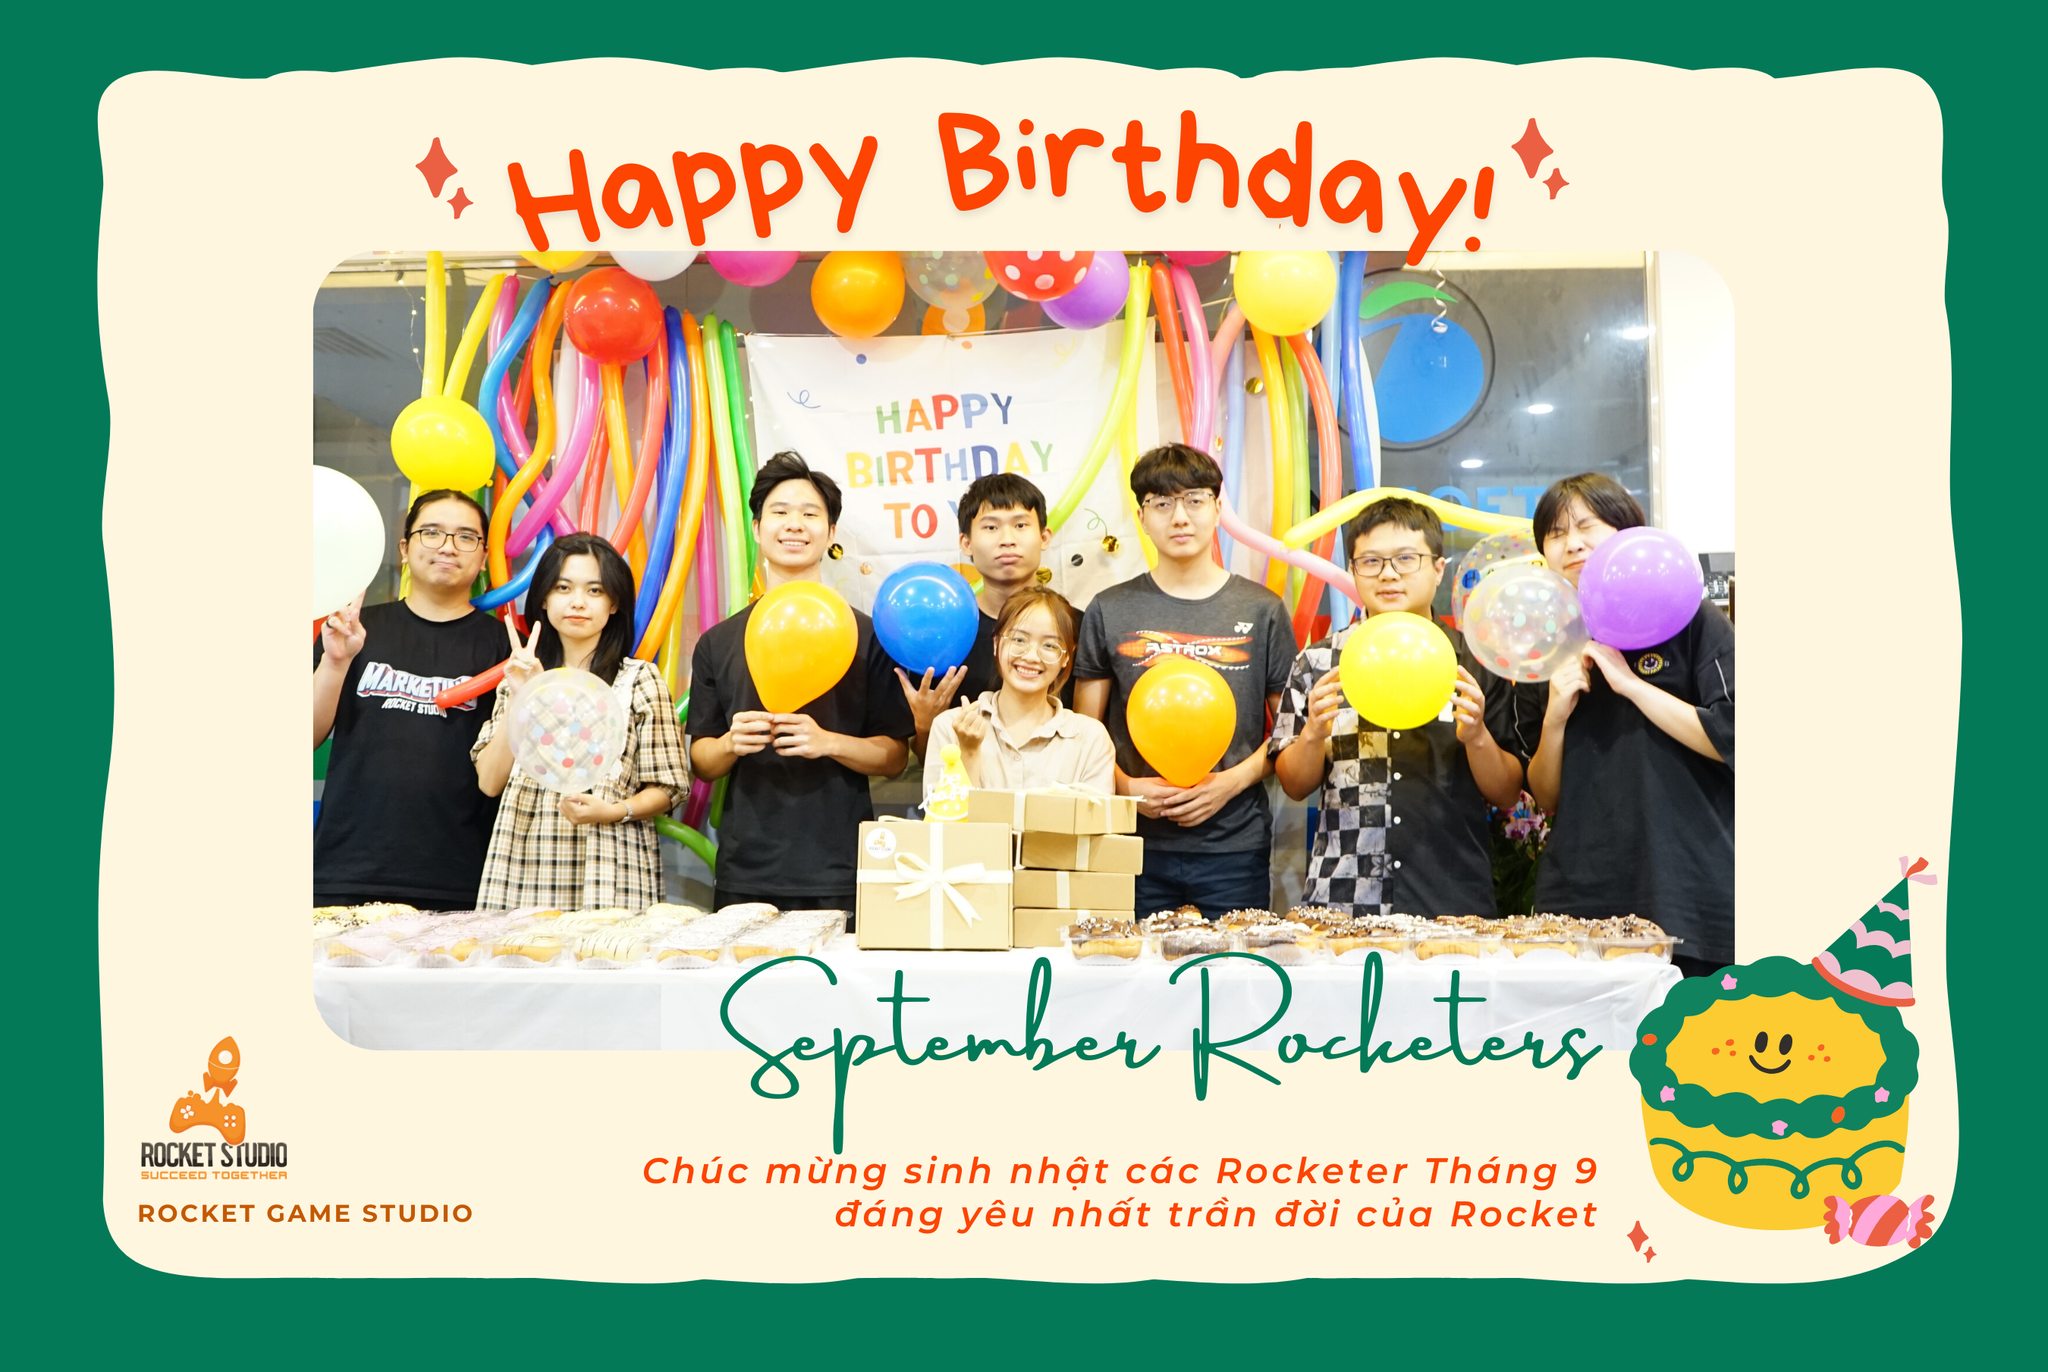 [ROCKETER DAY] 🎉🎂 Happy Birthday to September Rocketers🎂